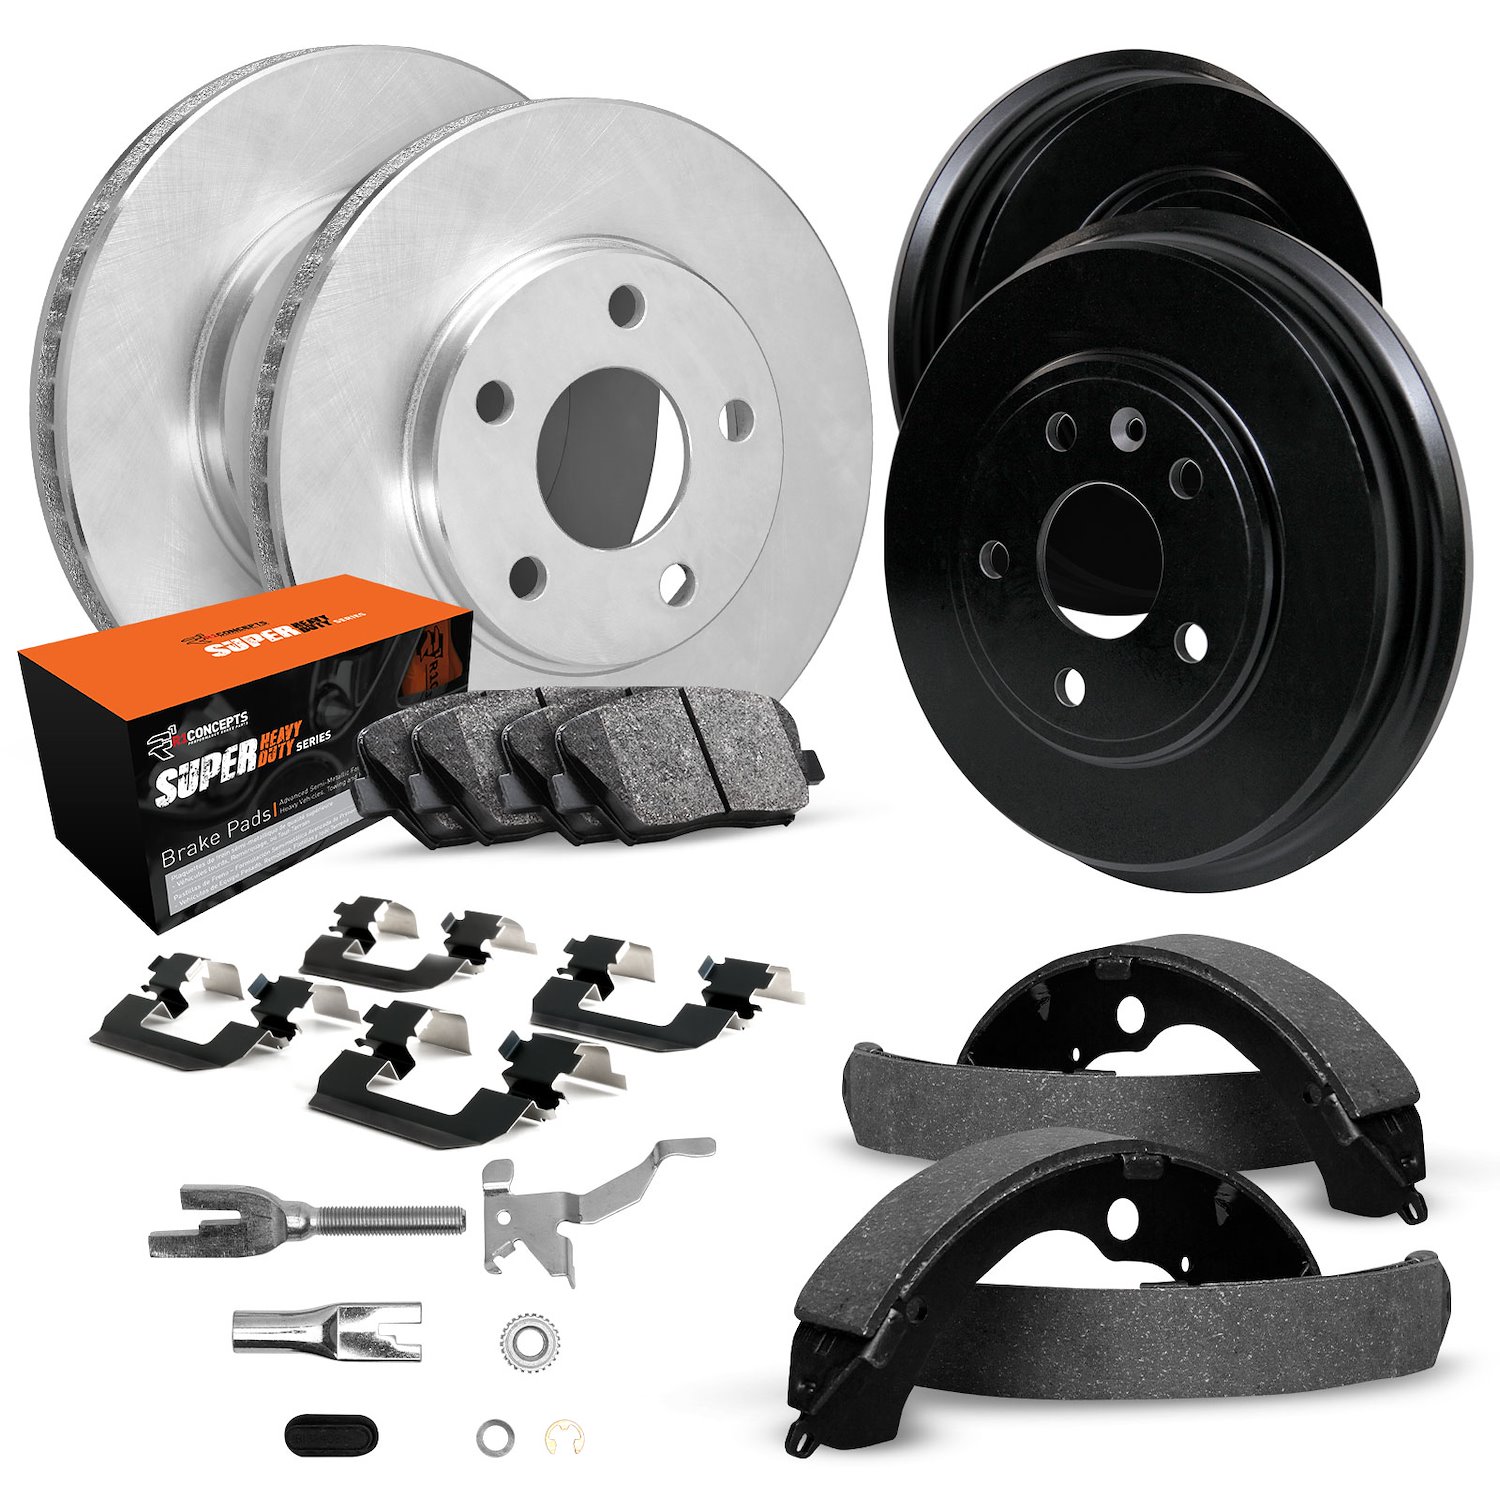 E-Line Blank Brake Rotor & Drum Set w/Super-Duty Pads, Shoes, Hardware, & Adjusters, 1977-1977 GM, Position: Front & Rear